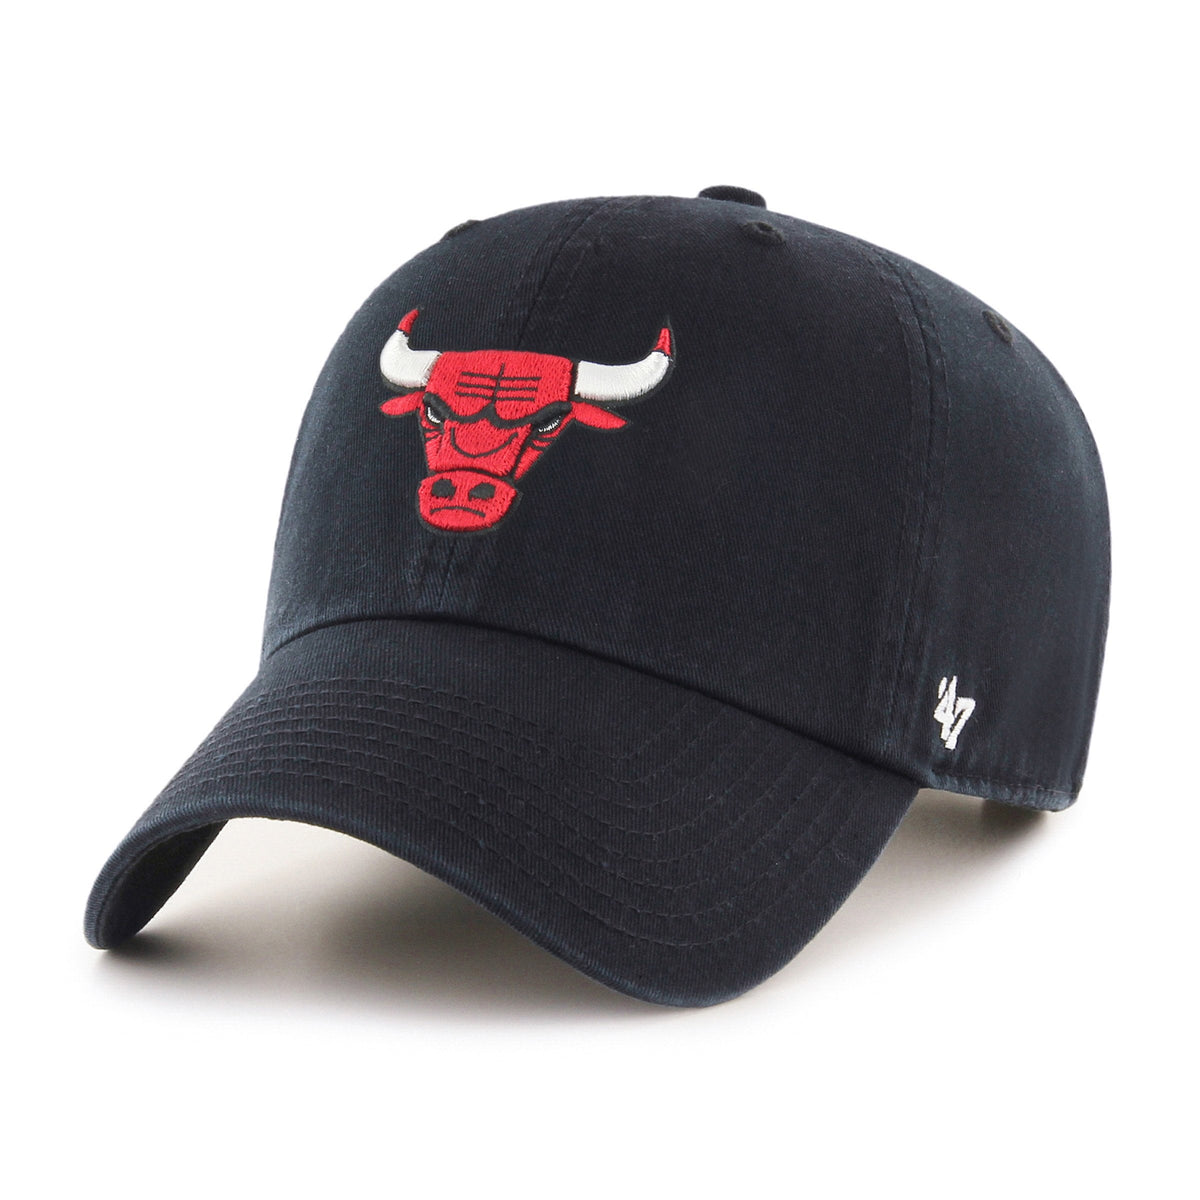 CHICAGO BULLS '47 CLEAN UP YOUTH